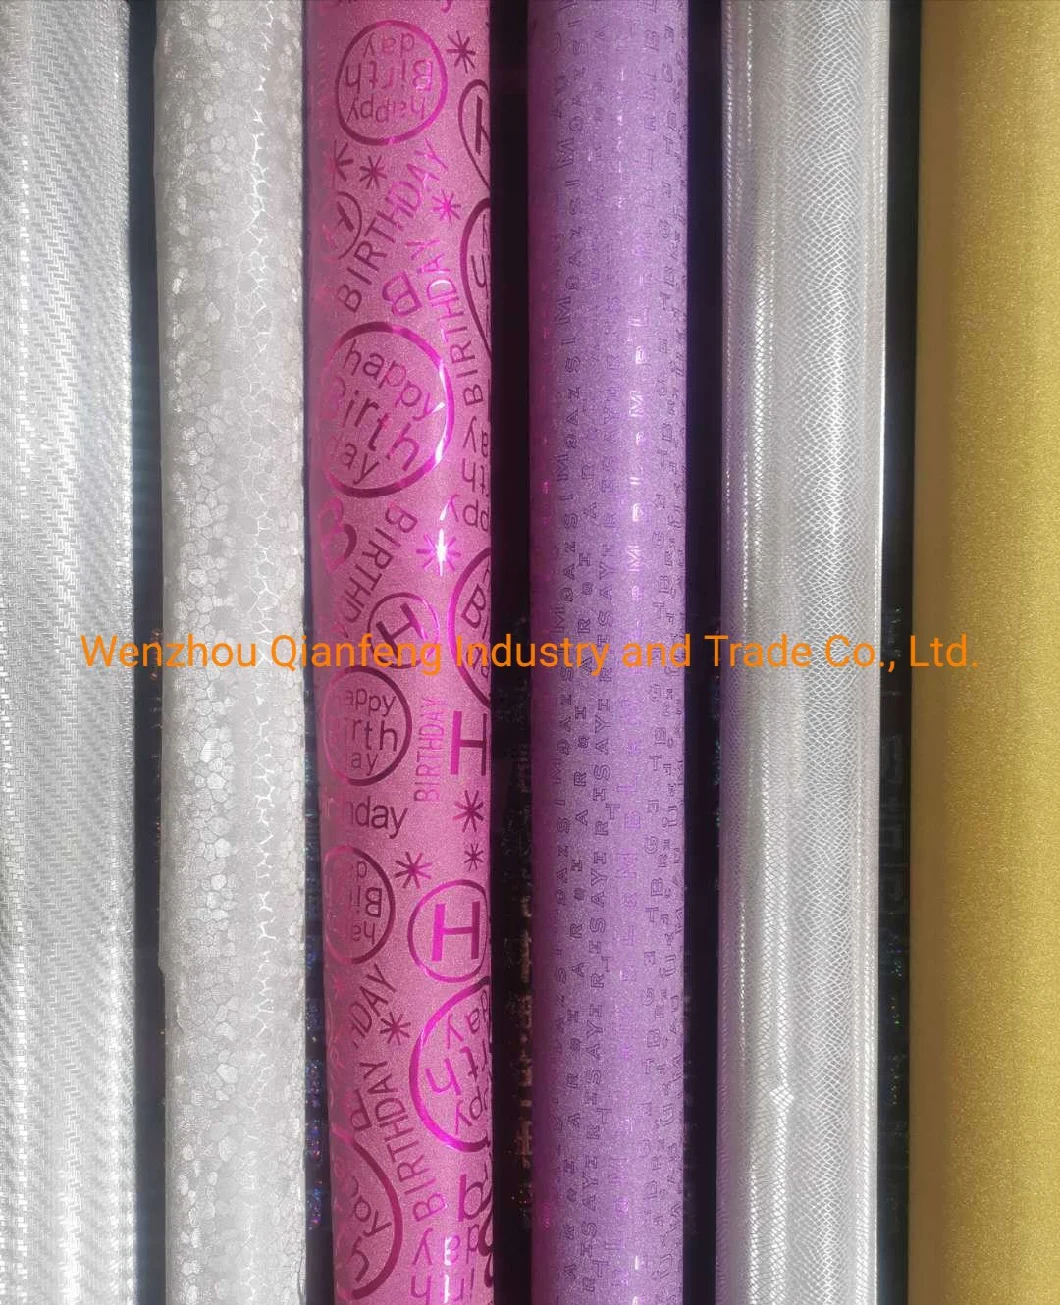 CPP Rainbow Packaging Decoration Coated Glitter Sparkling Lamination Film